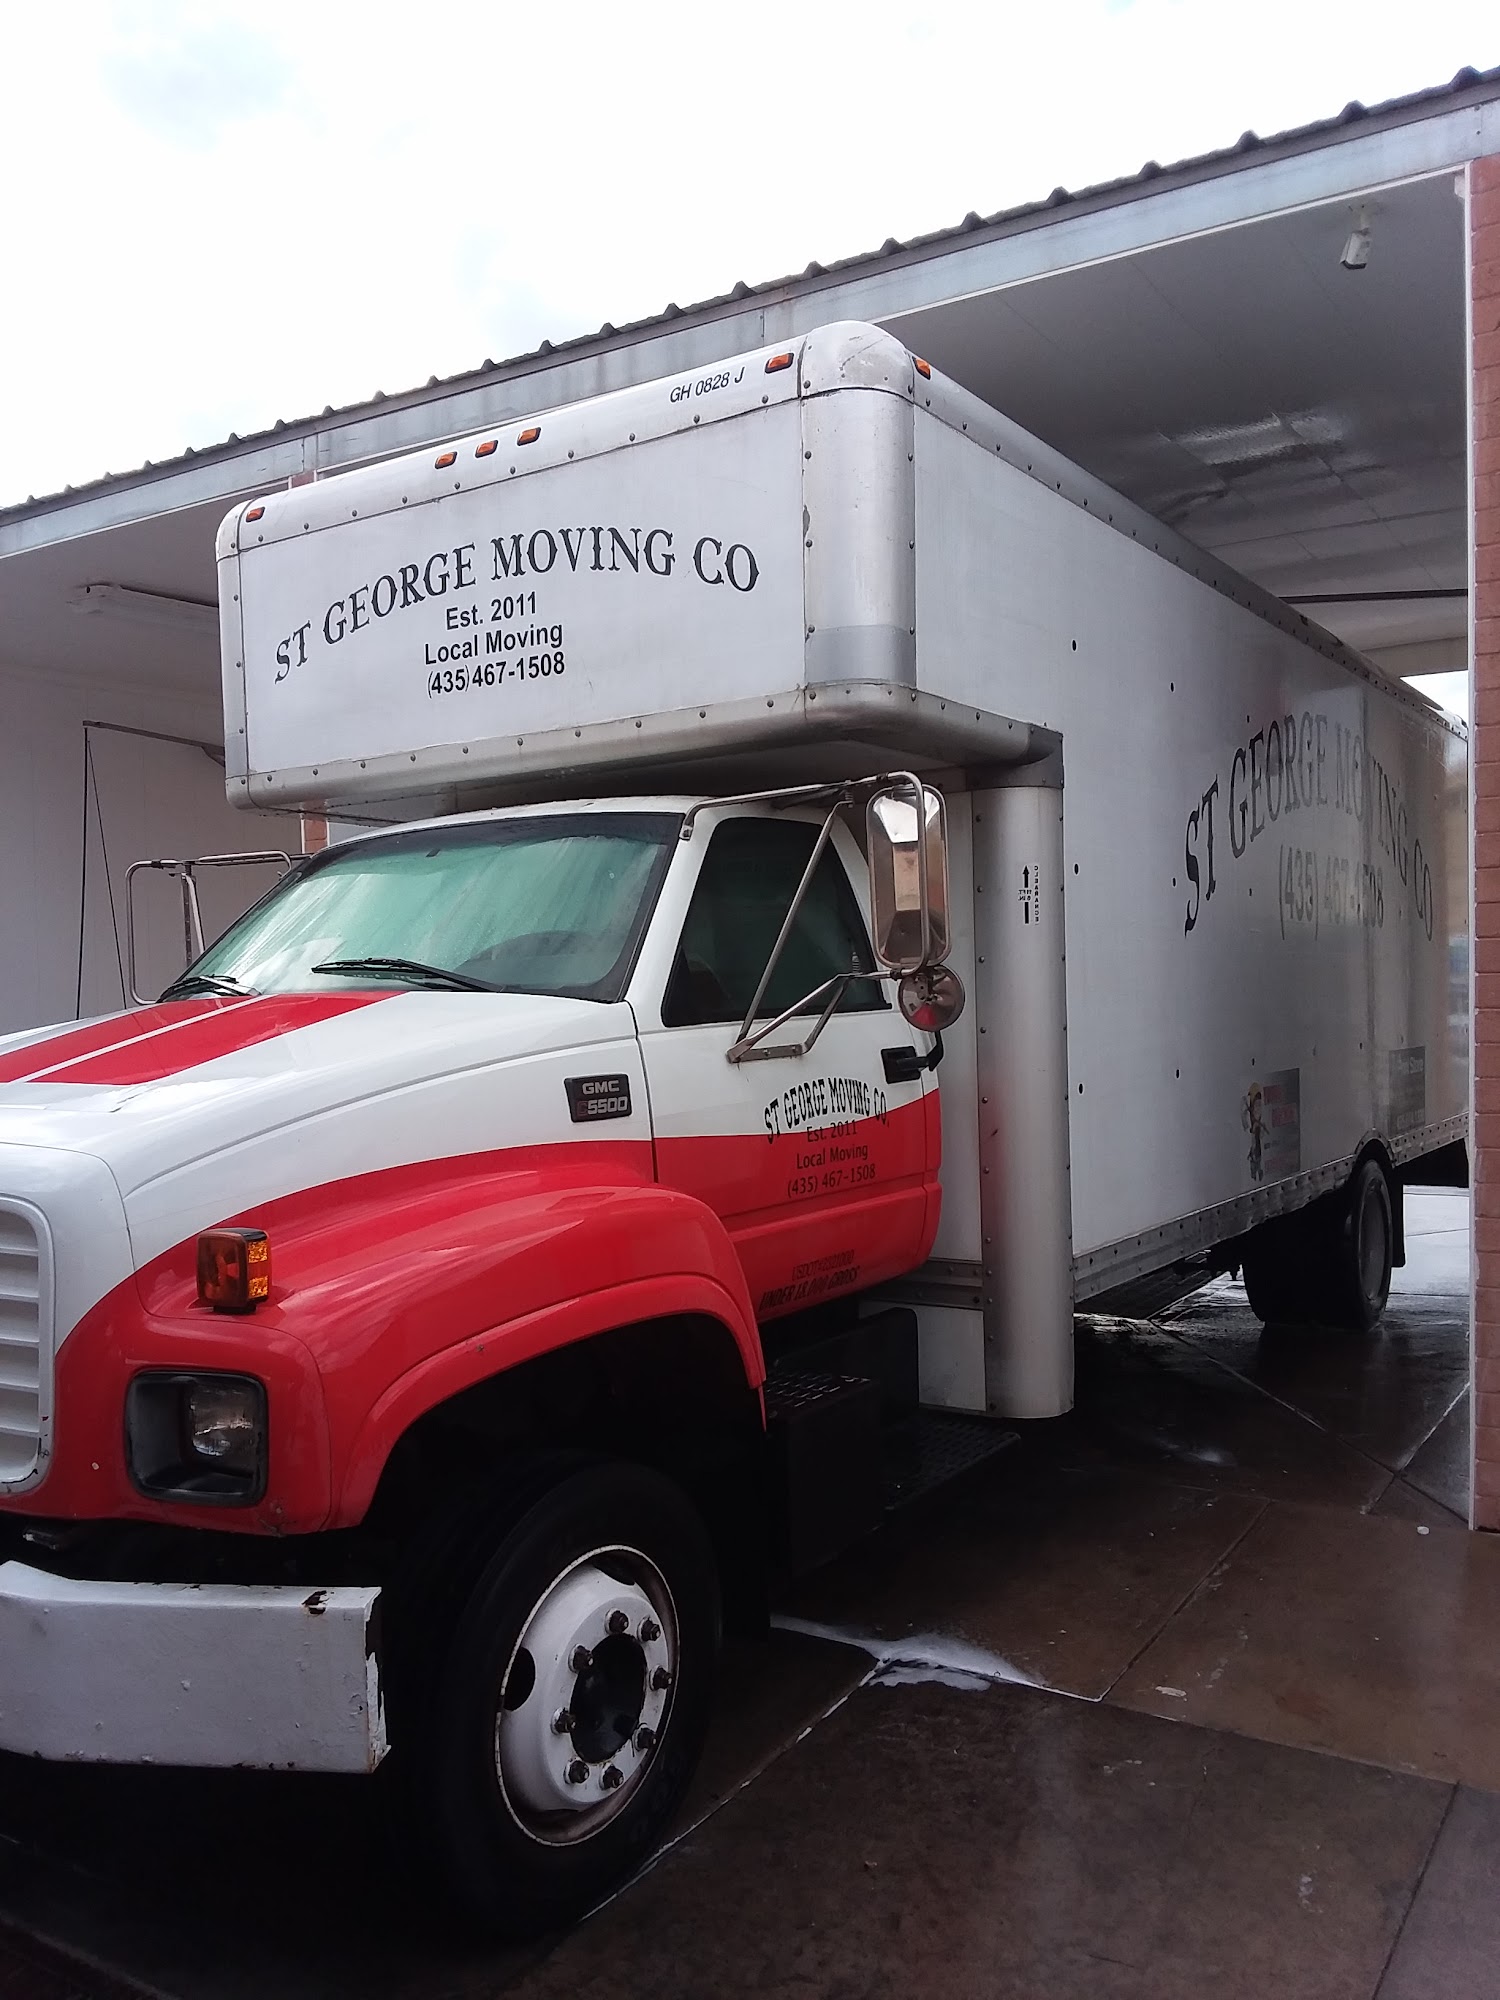 St George Moving Company